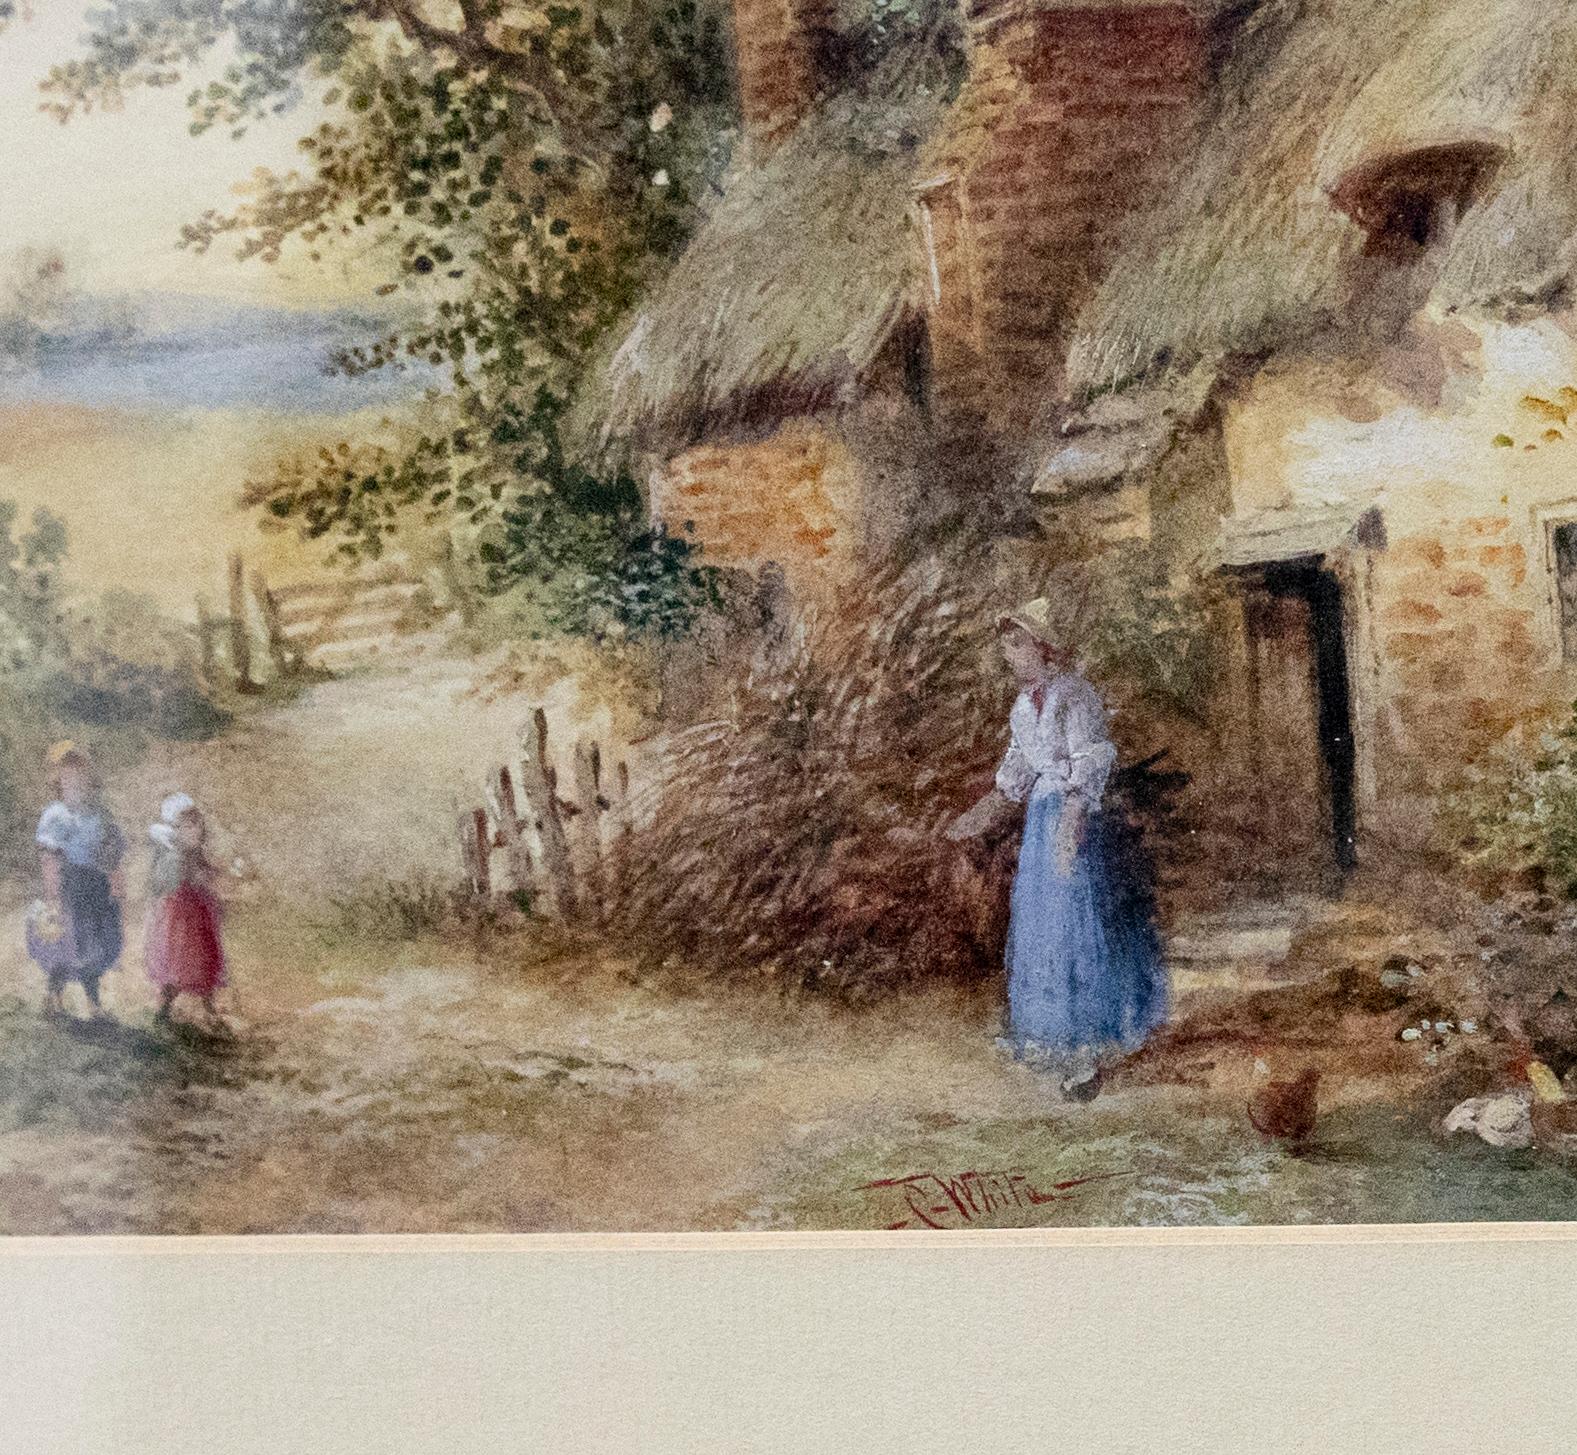 A charming watercolour scene depicting two young girls bringing a basket of flowers back to their mother. They walk the path to a thatched cottage surrounded by idyllic British countryside. On paper.